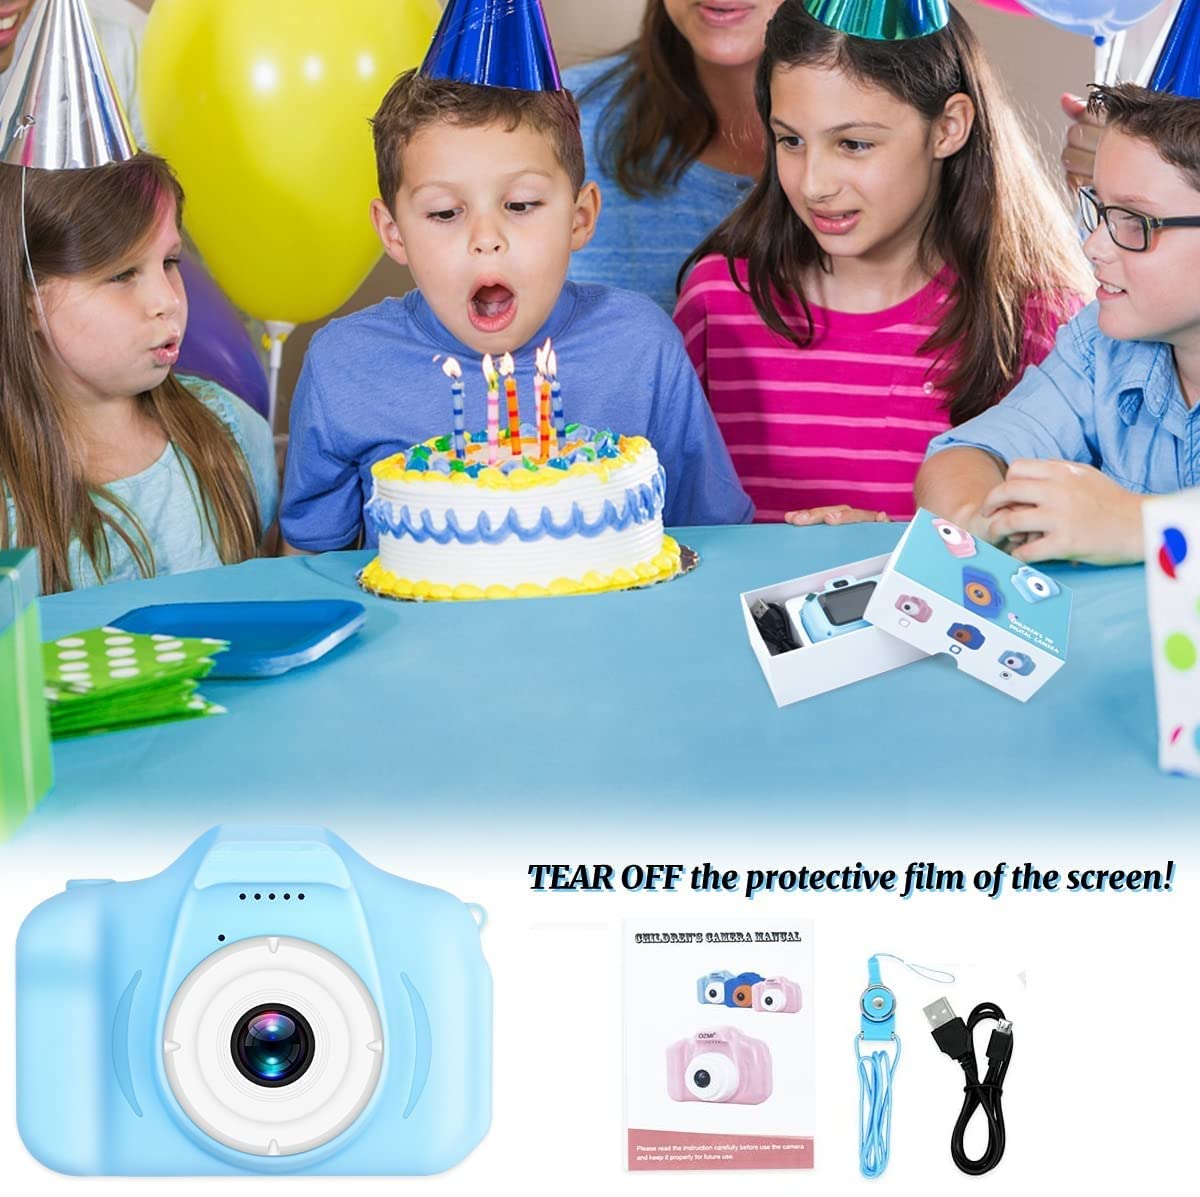 Digital Photo Camera - Multicolor Mini Video Recorder Camera - Portable Action Toy Camera for Kids - Perfect Birthday Gifting Item, Toys for Kids